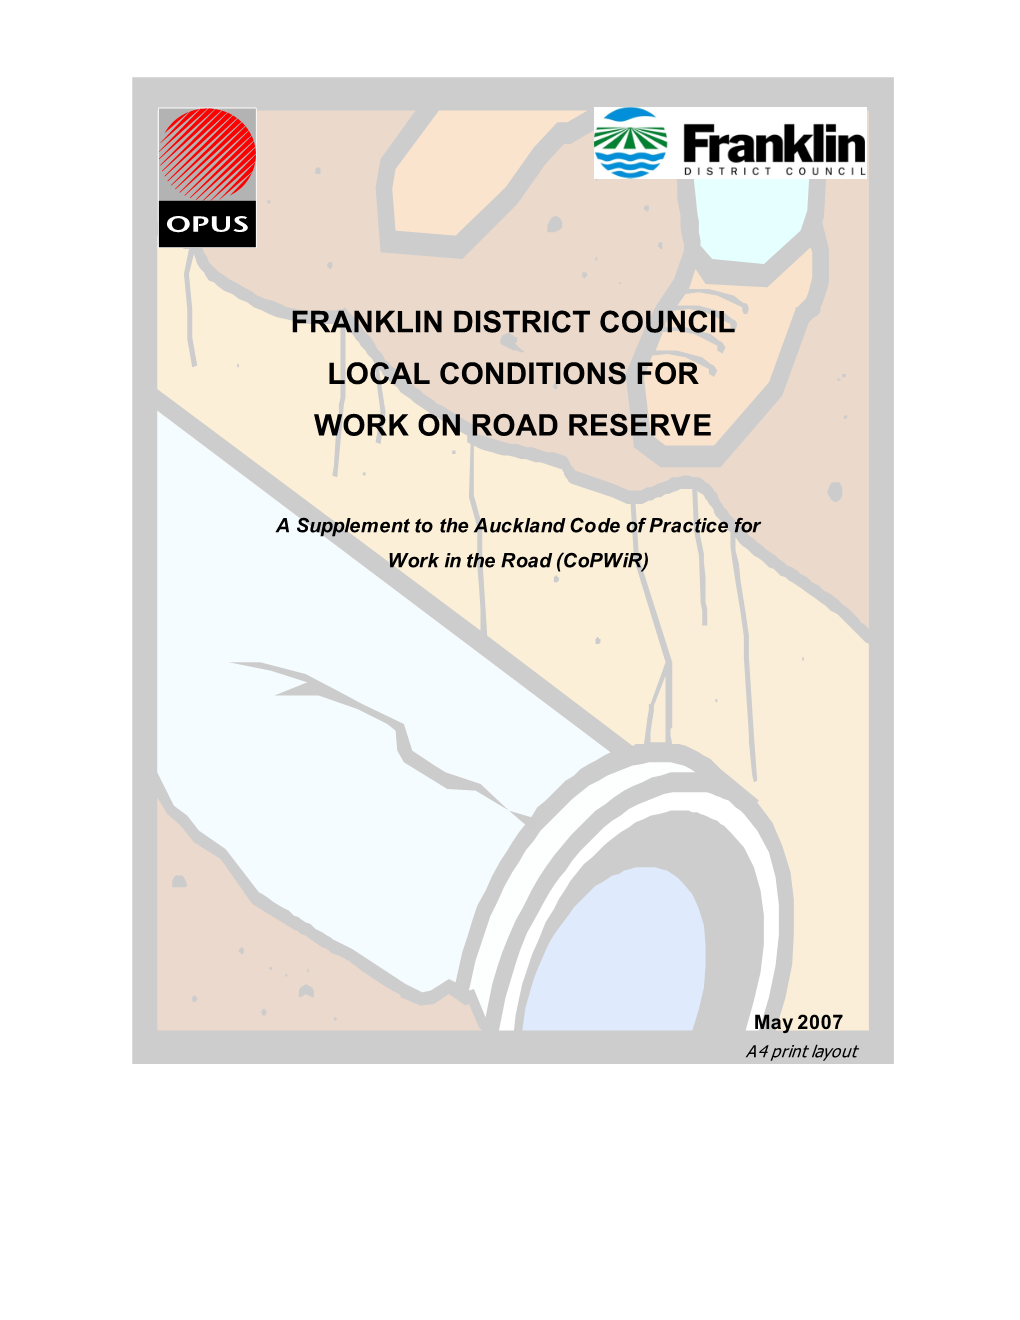 Franklin District Council Local Conditions for Work on Road Reserve